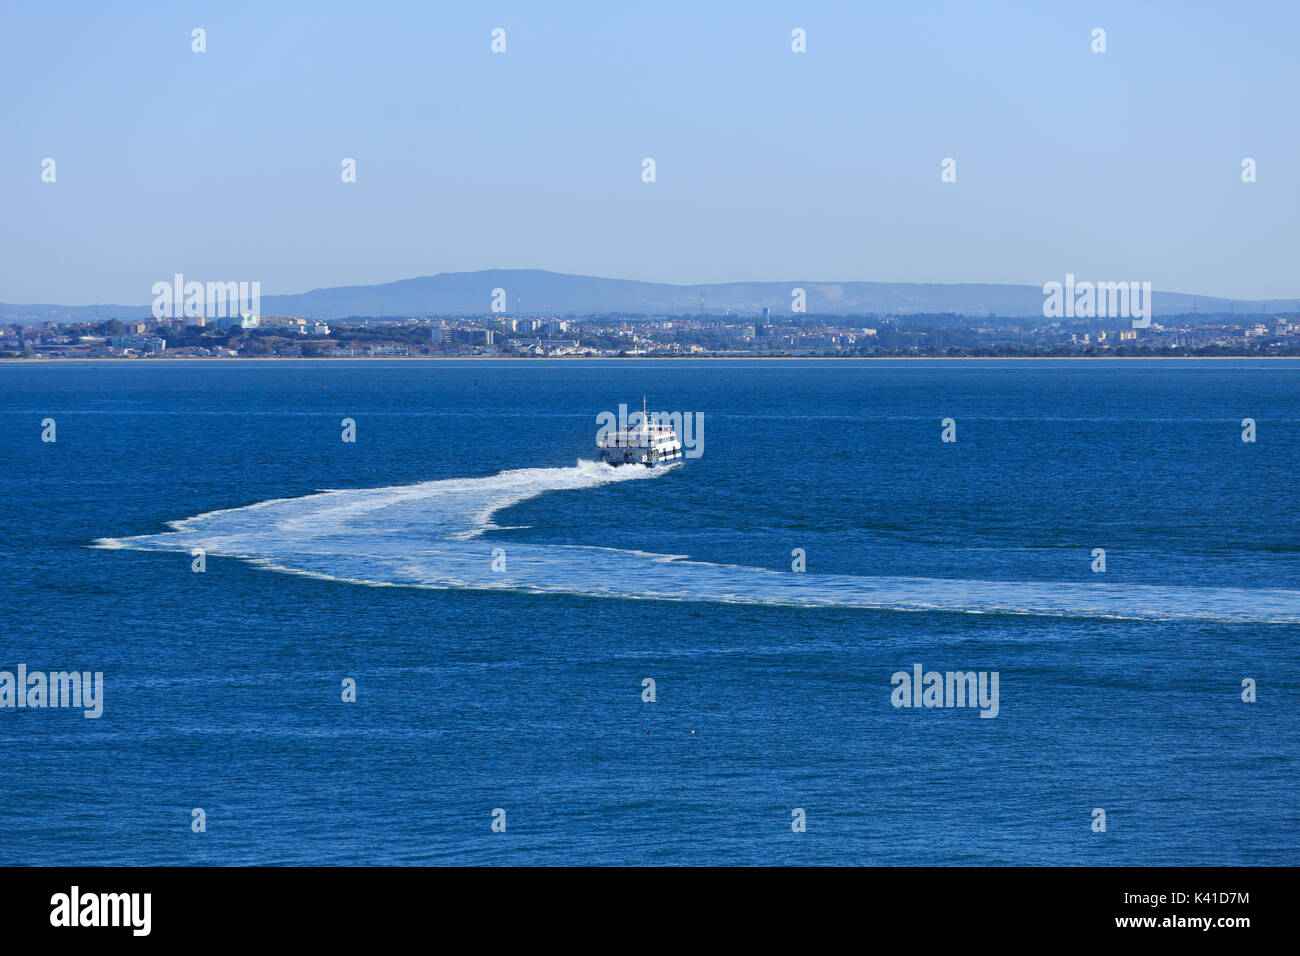 Blue and White Ferry Cruising Away in Lisbon Stock Photo